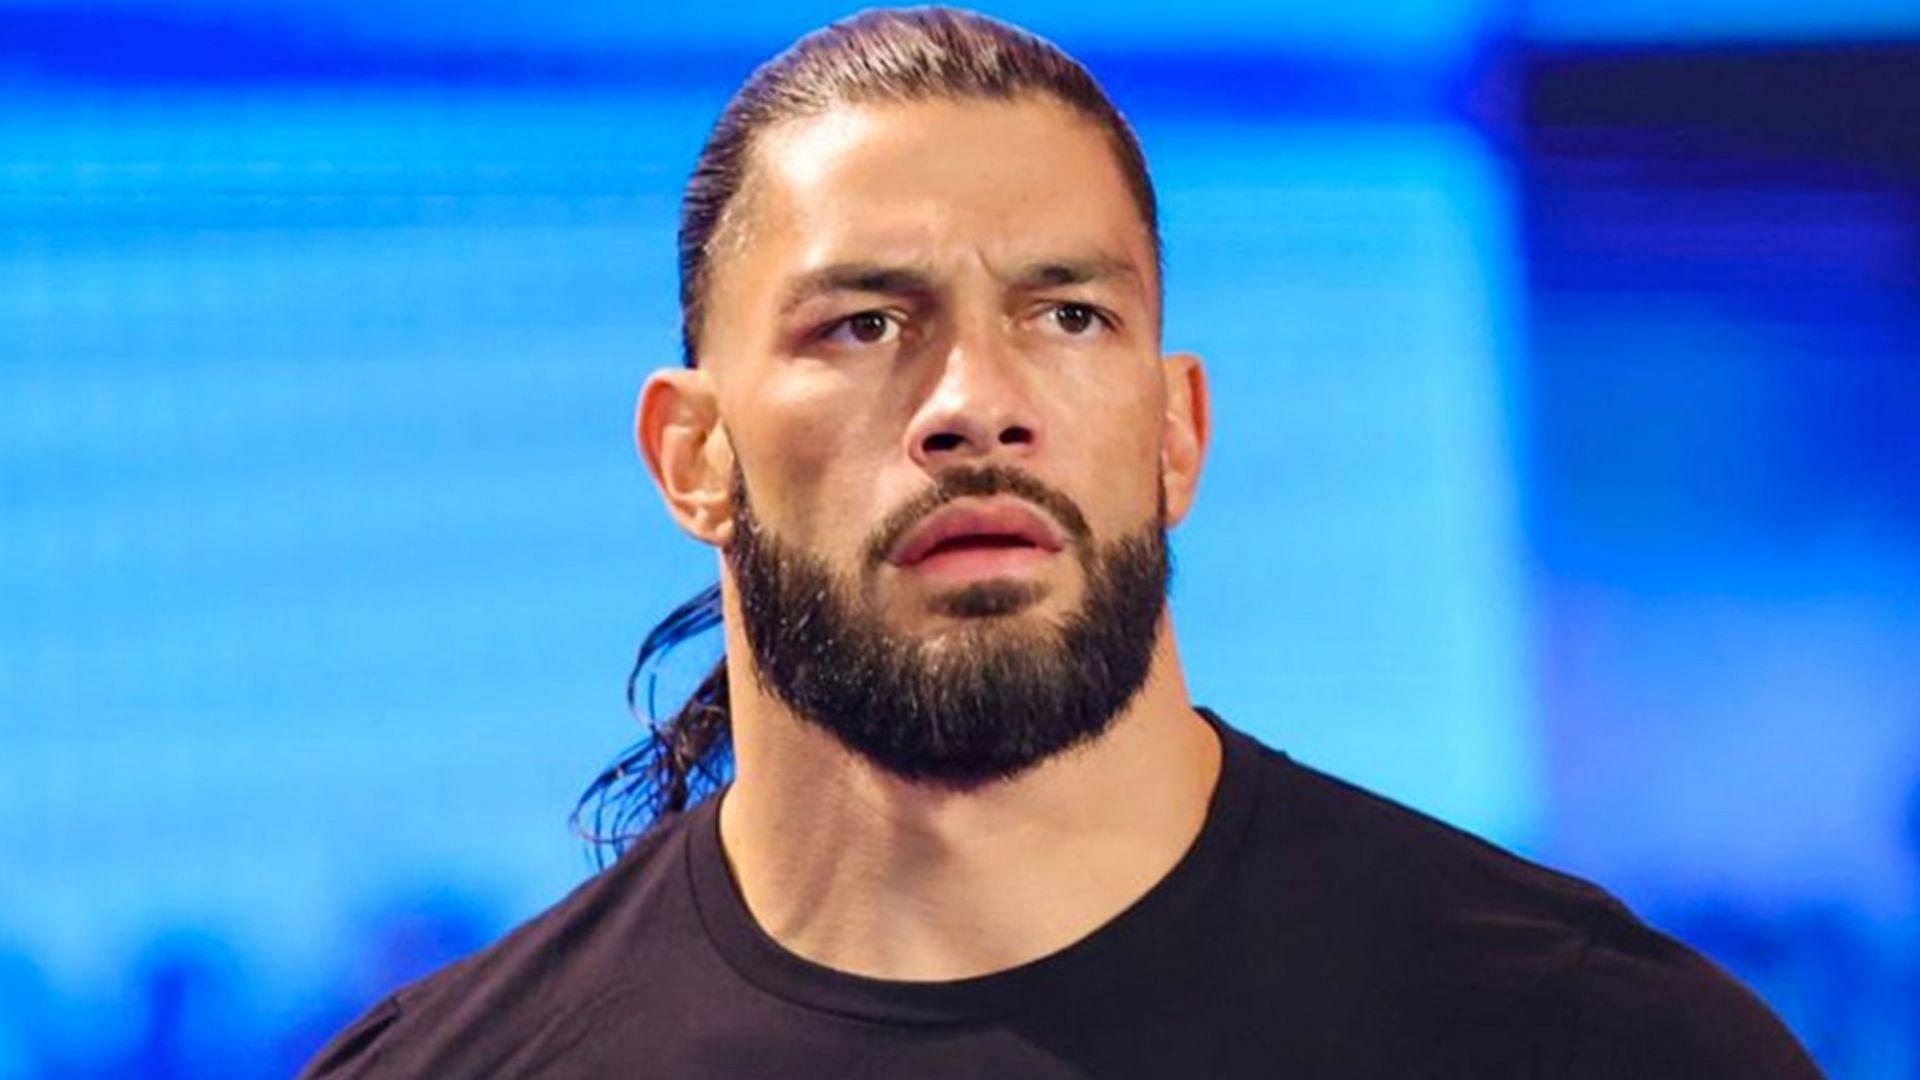 Rumor: Roman Reigns Possibly Facing 30-Year-Old at WWE WrestleMania 40